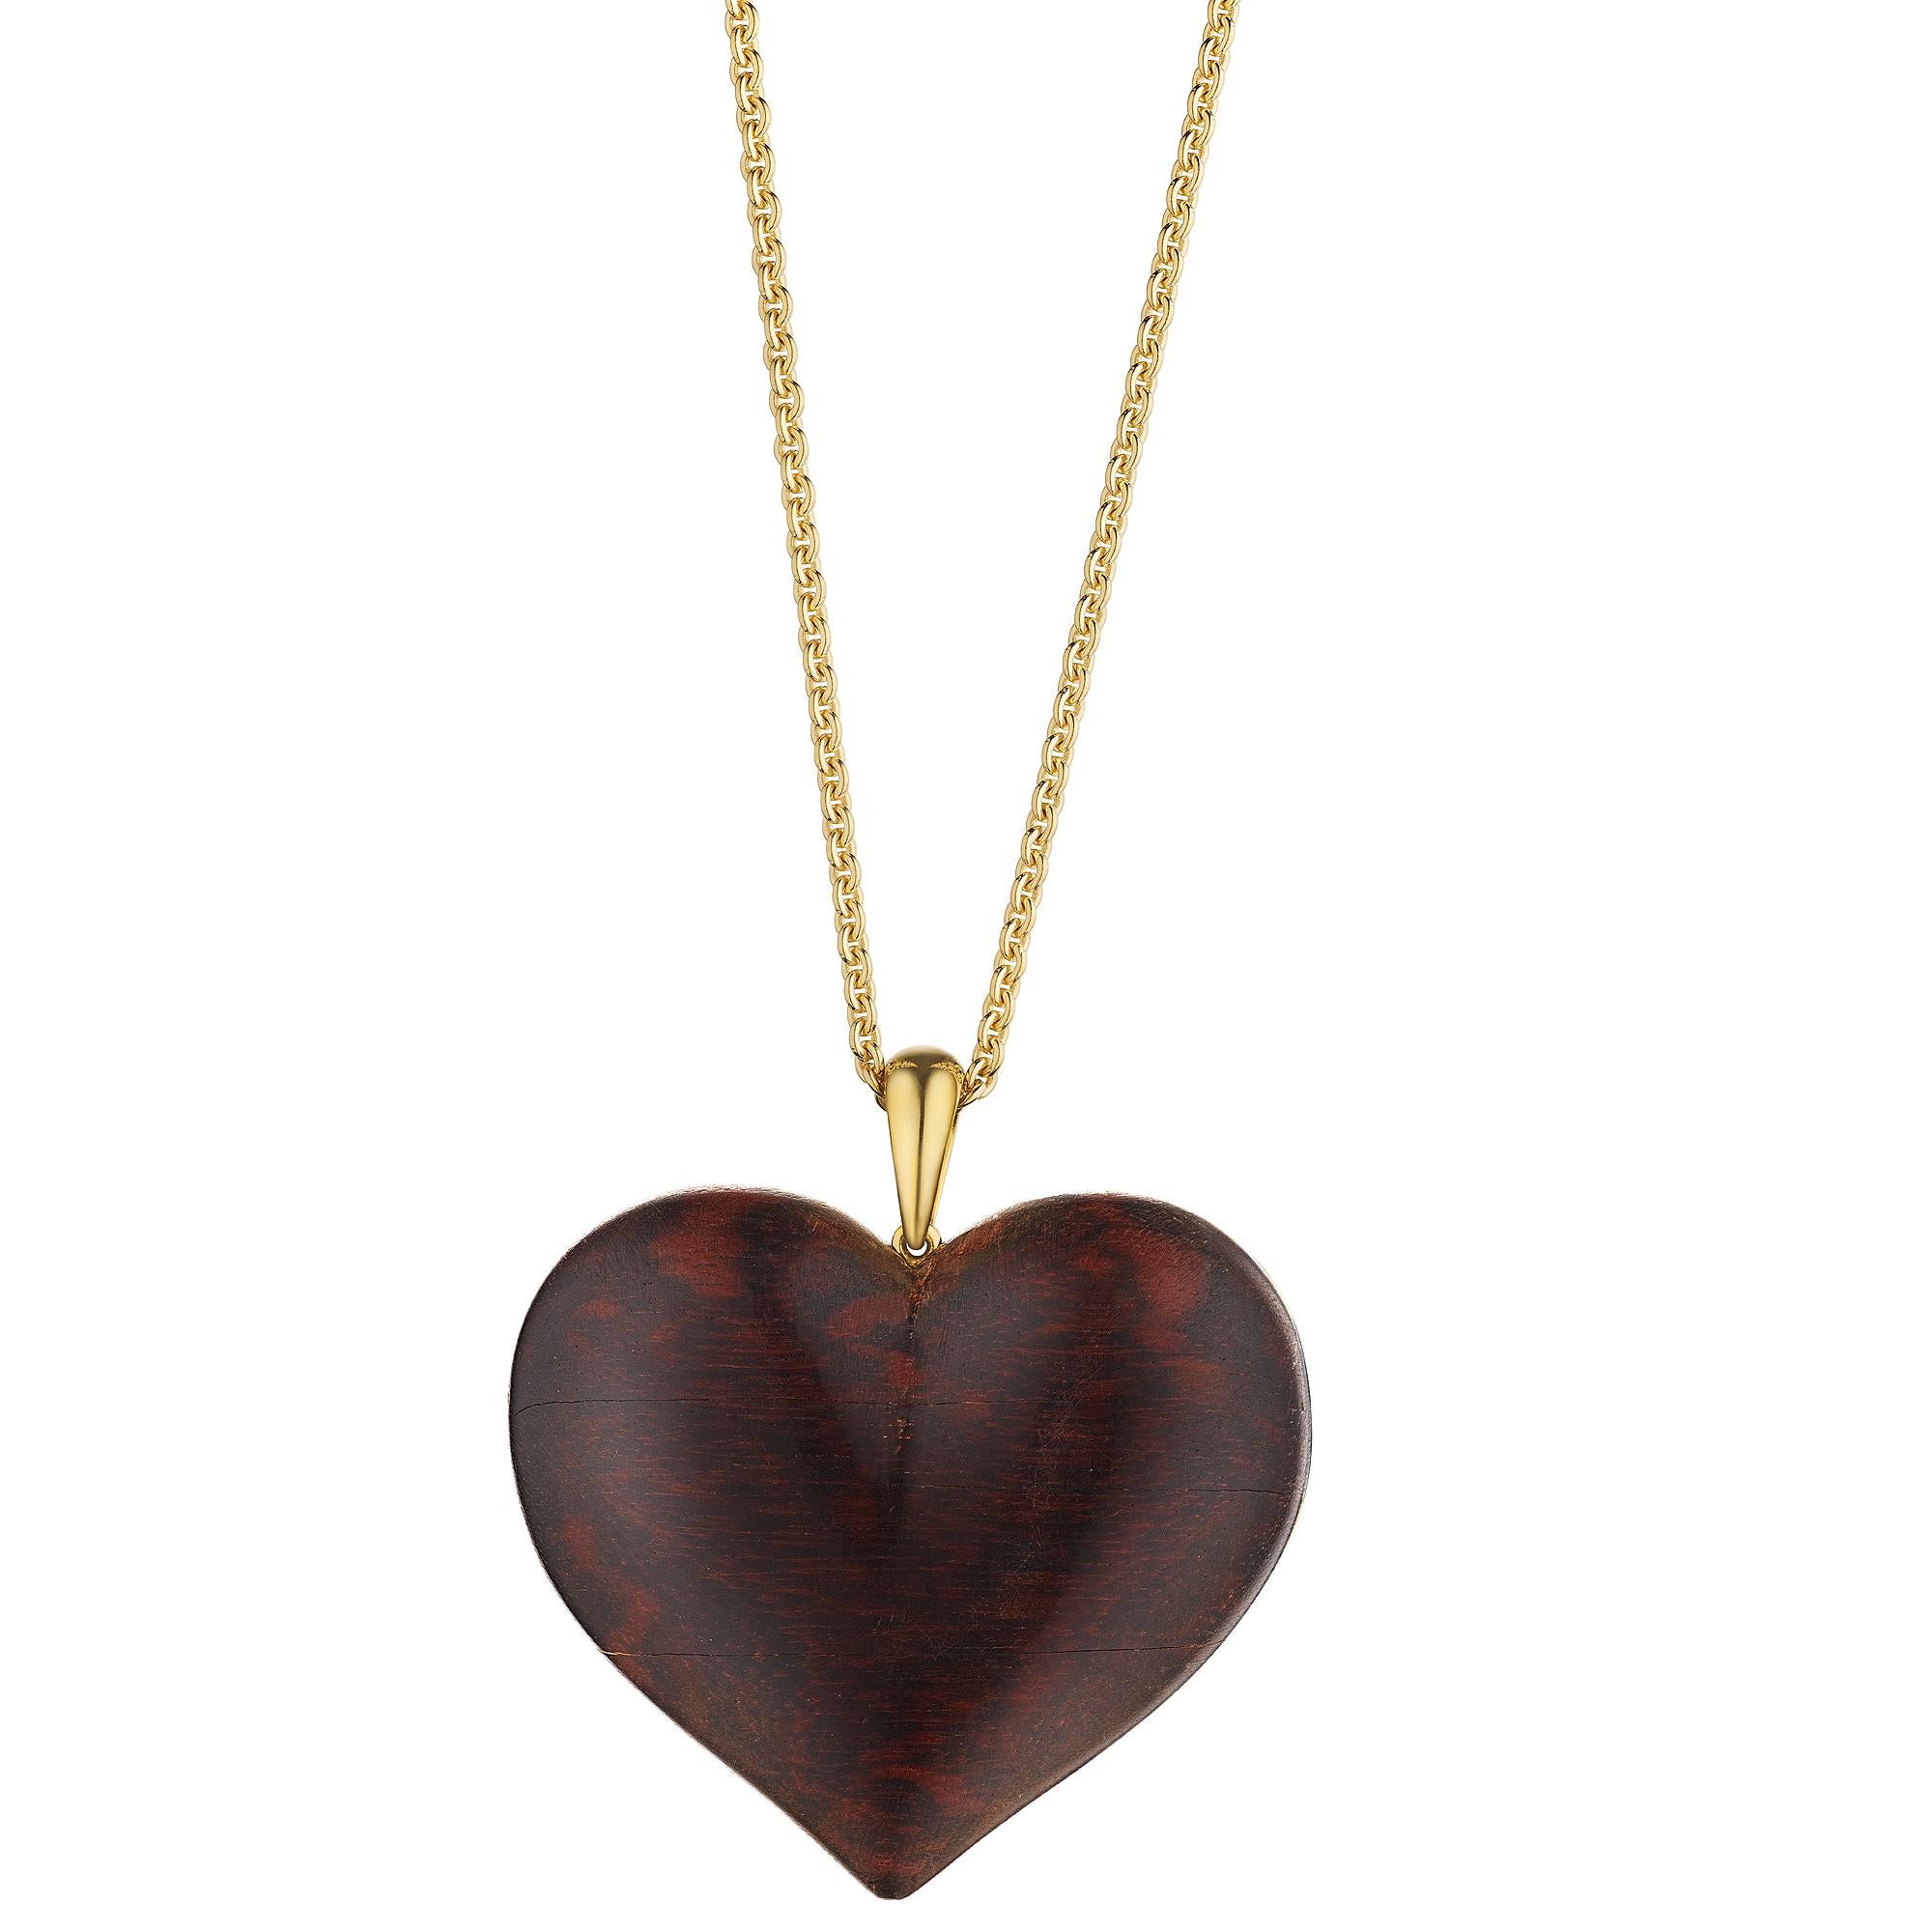 Heart felt.  This vintage Rene Boivin Paris natural wood and gold bombe heart pendant is filled with timeless emotion.  Enhanced with polished 18 karat yellow gold bead and trefoil motifs, this romantic pendant heart is both rare and collectible. 